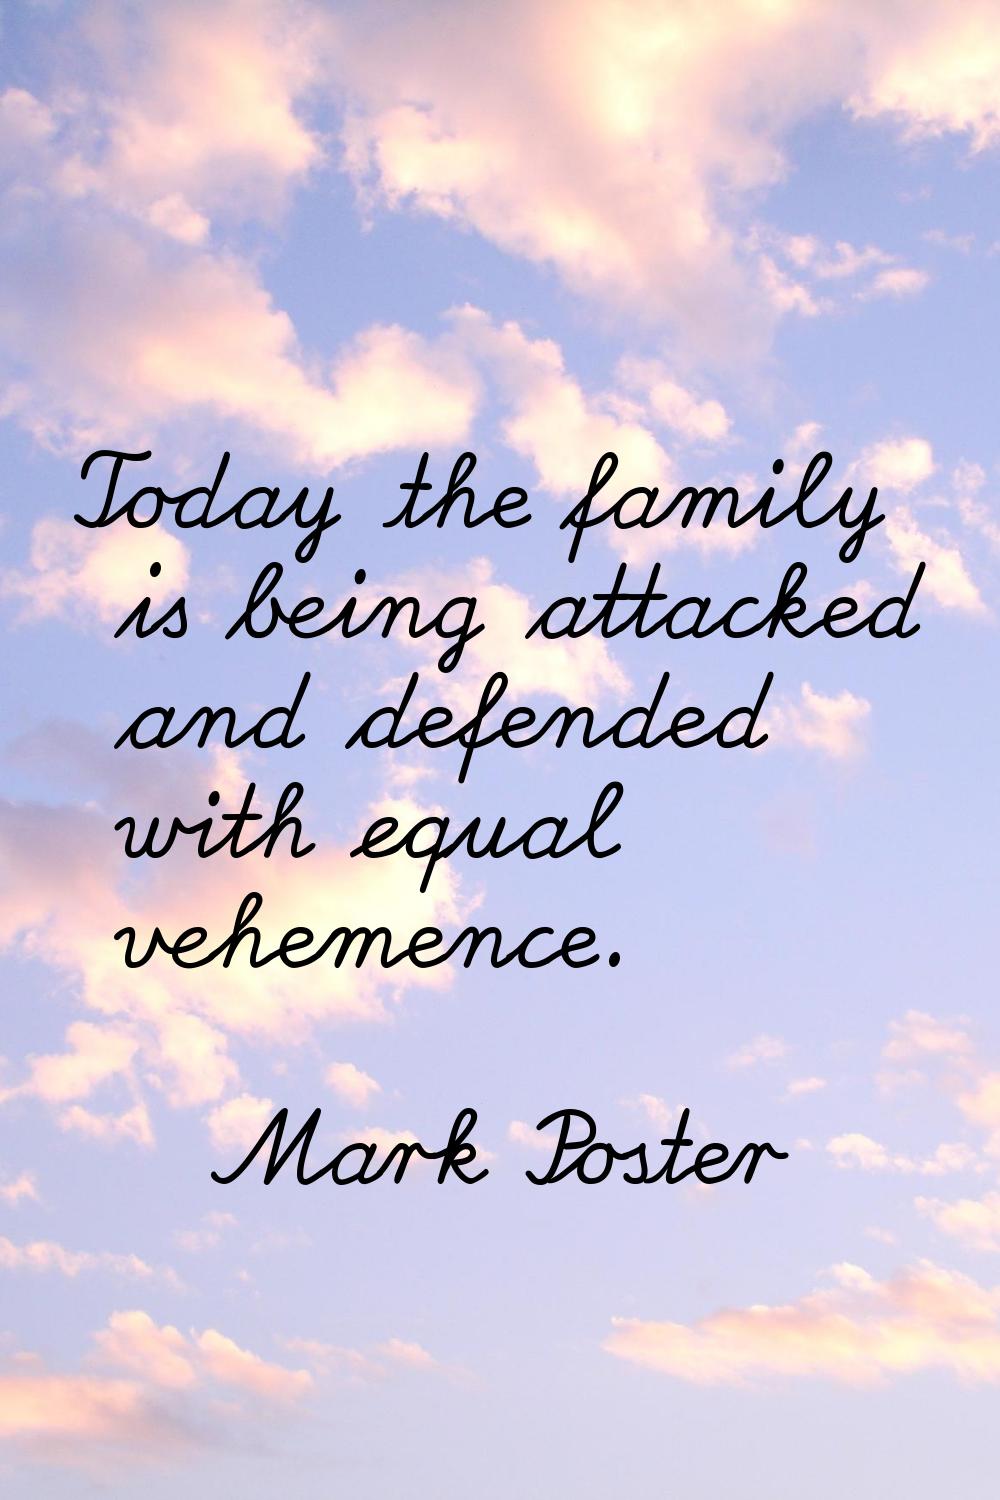 Today the family is being attacked and defended with equal vehemence.